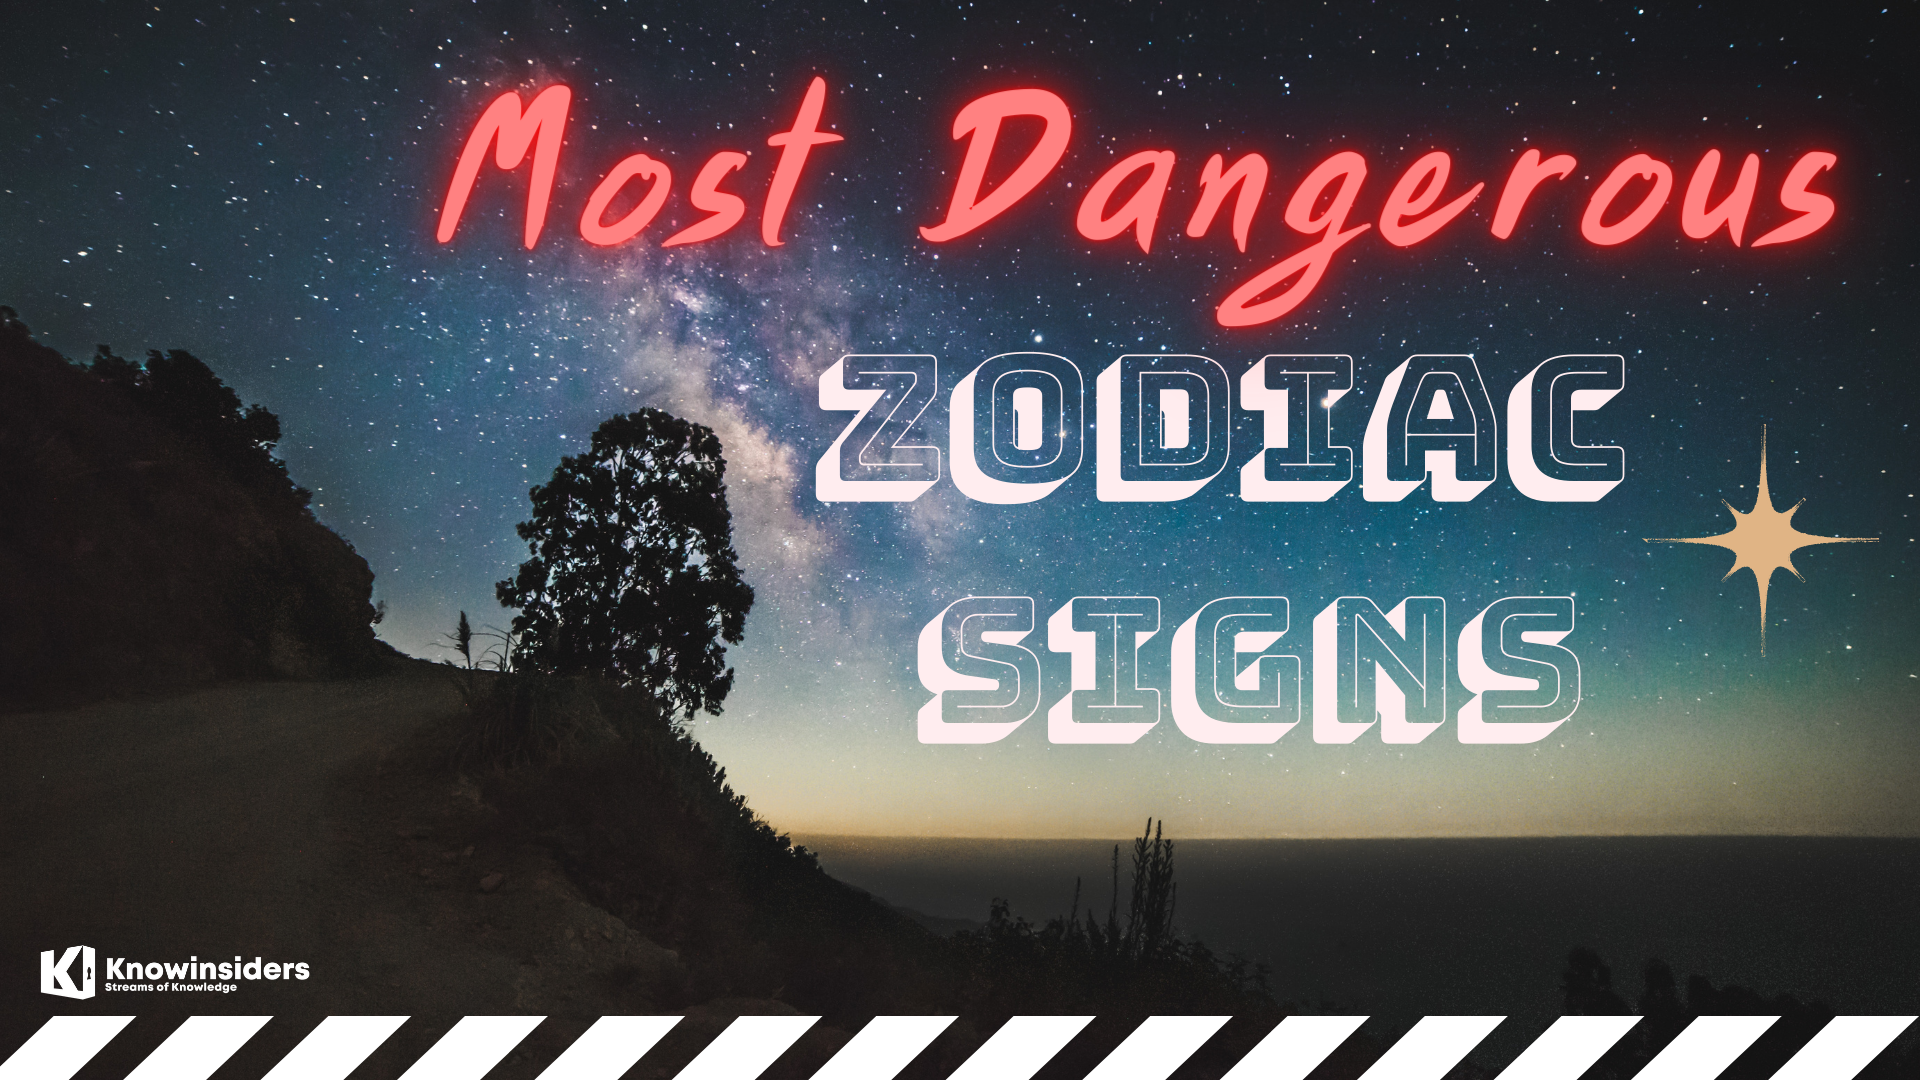 Top 5 Most Dangerous Zodiac Signs According To Astrology